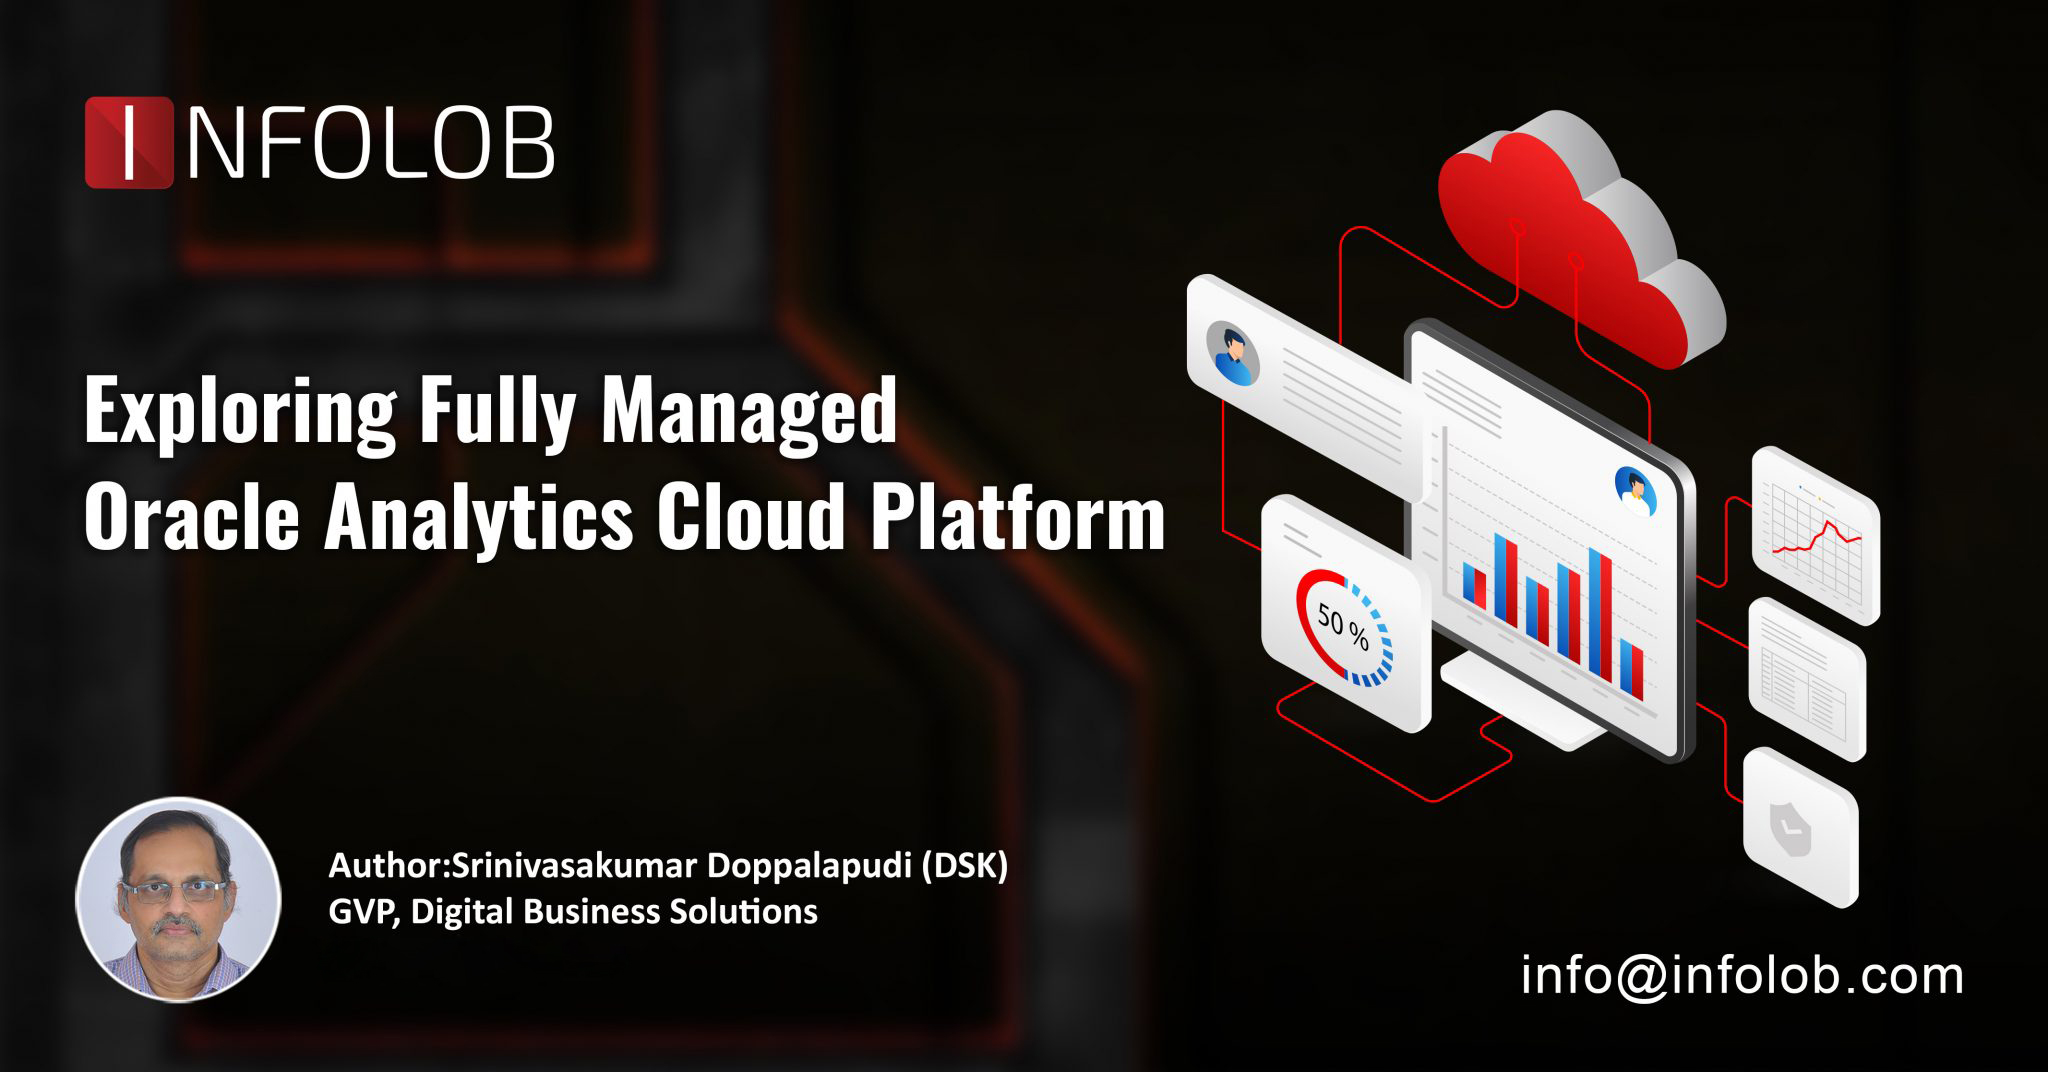 You are currently viewing Benefits & Key Features of Oracle Analytics Cloud